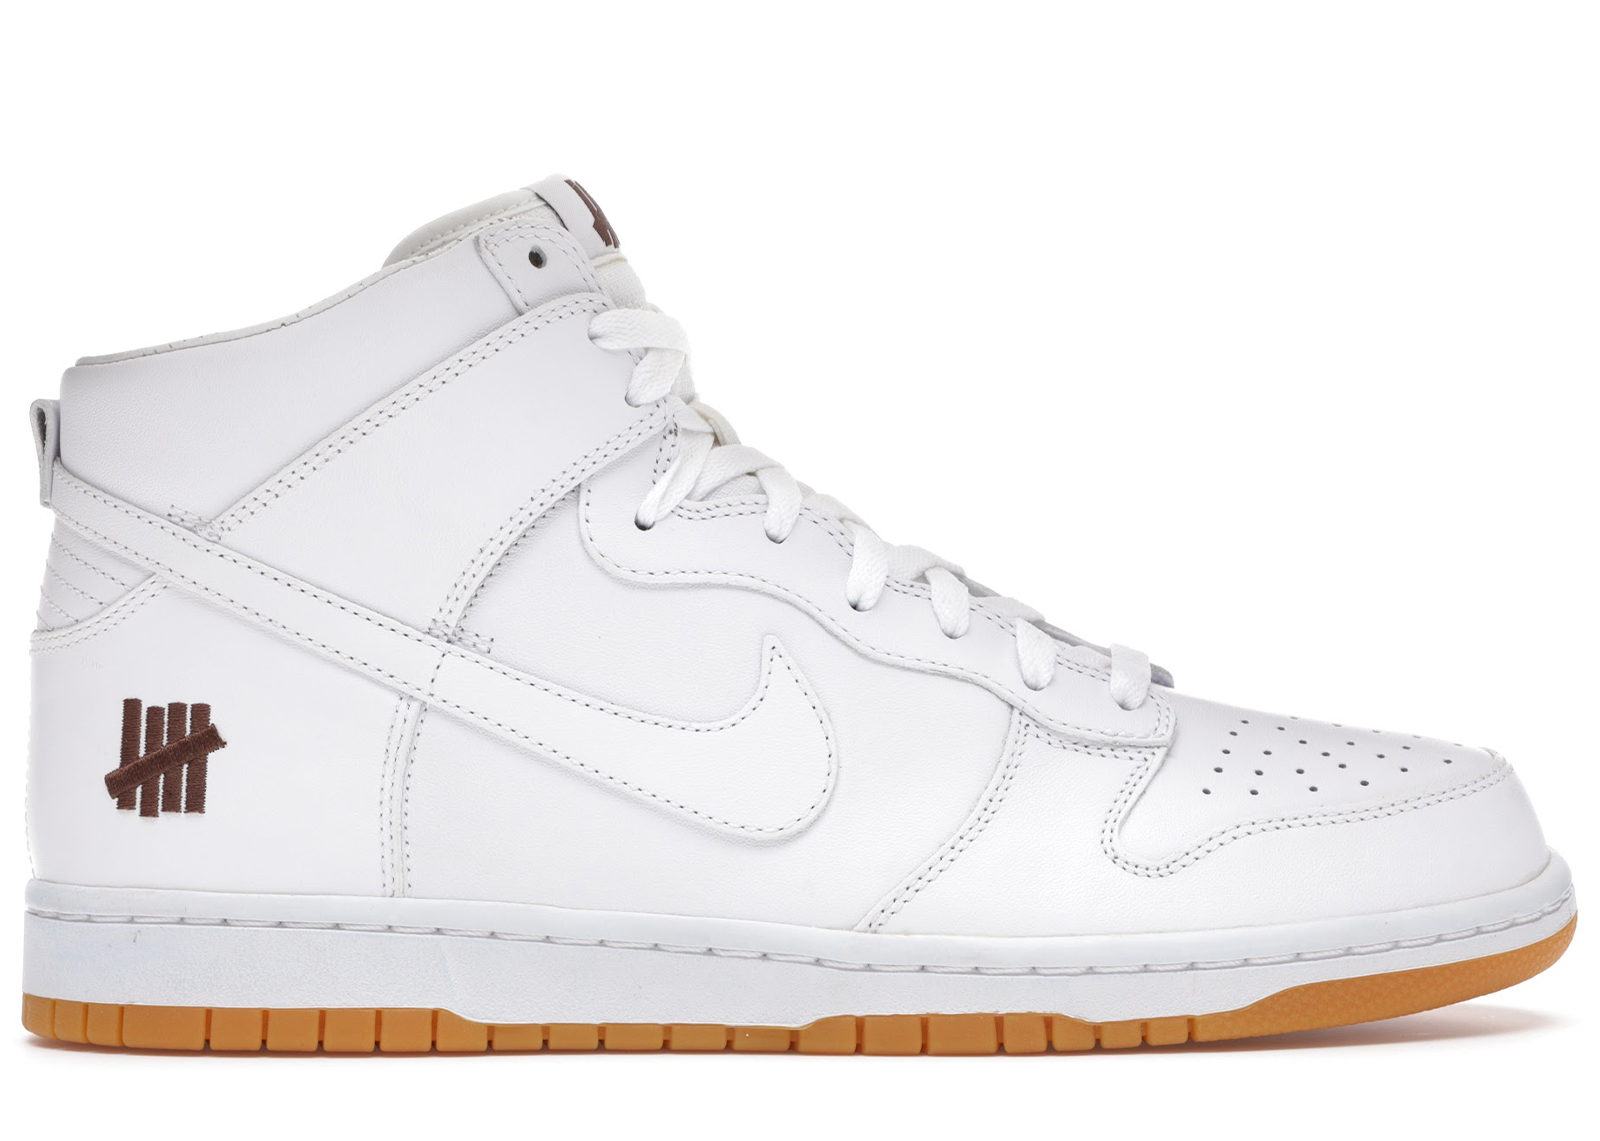 Nike Dunk High Undefeated Bring Back Pack White Men's - 598472-110